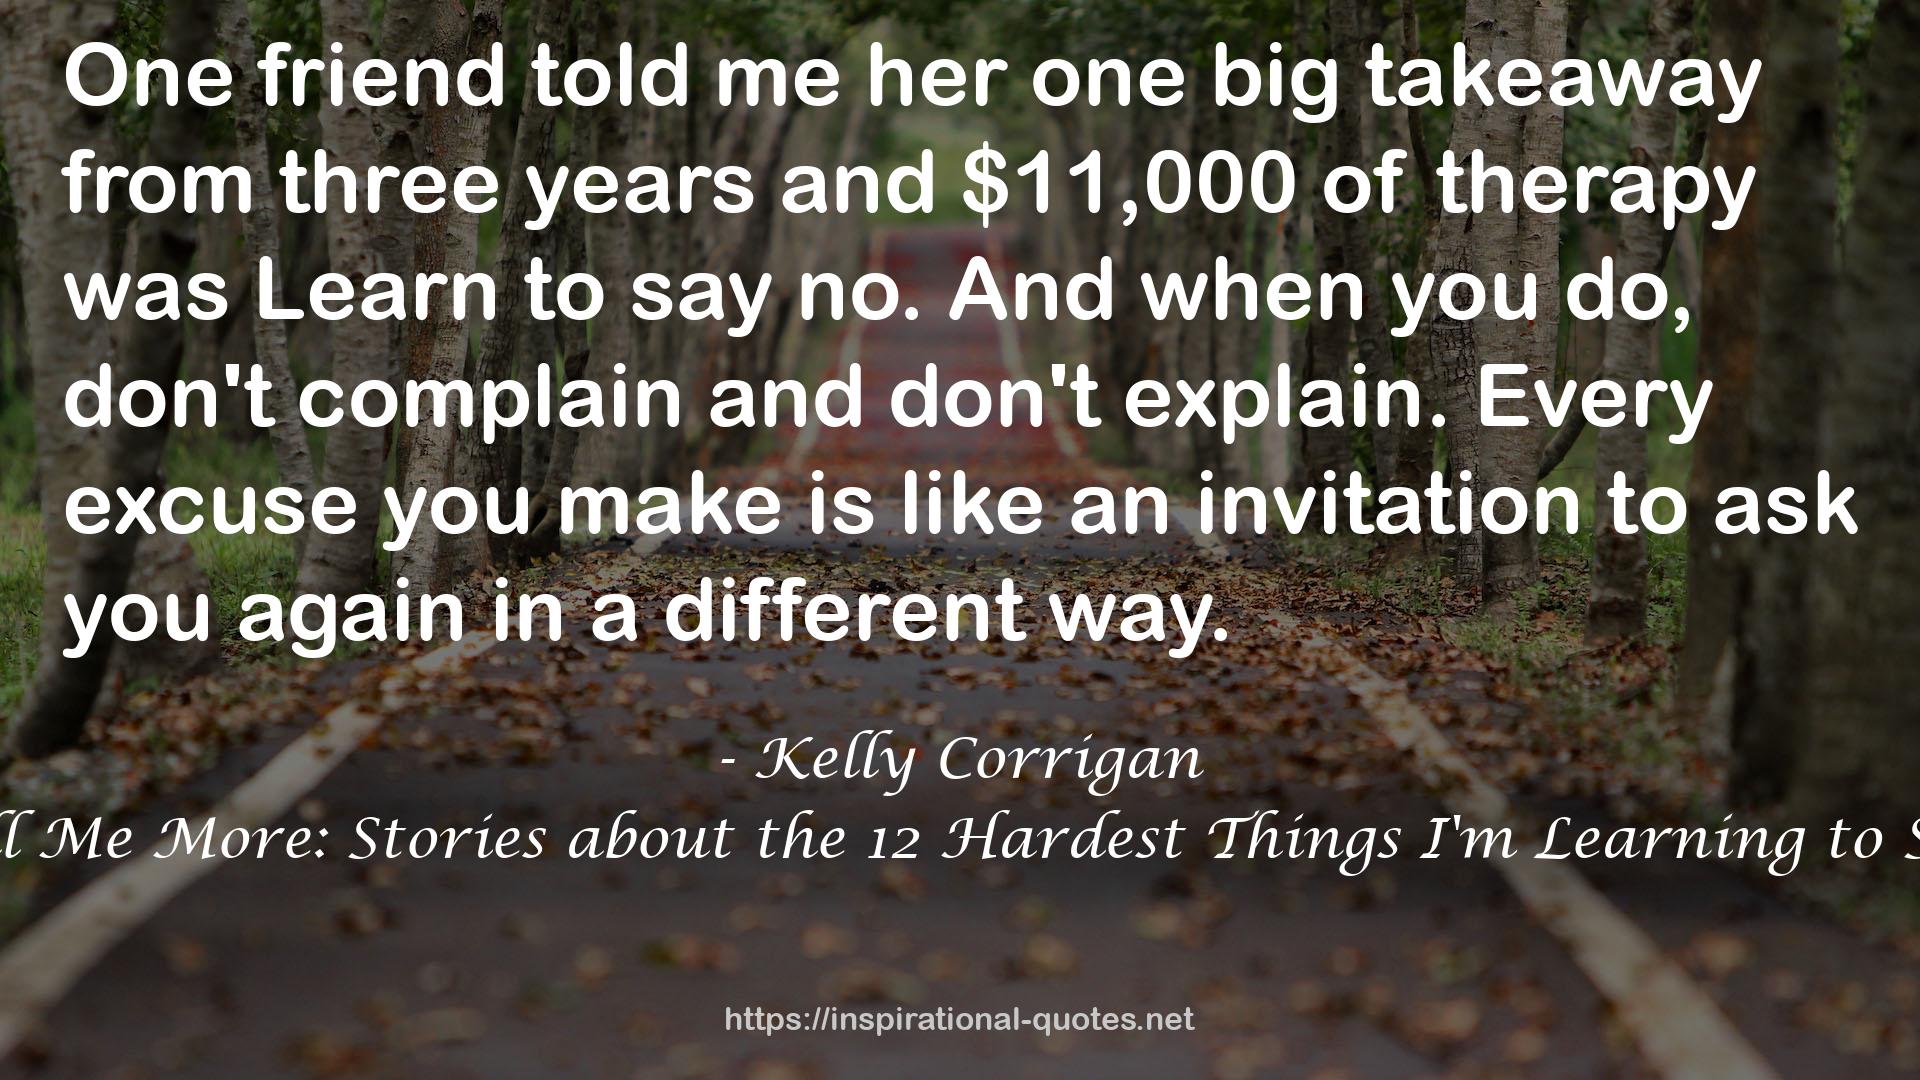 Tell Me More: Stories about the 12 Hardest Things I'm Learning to Say QUOTES